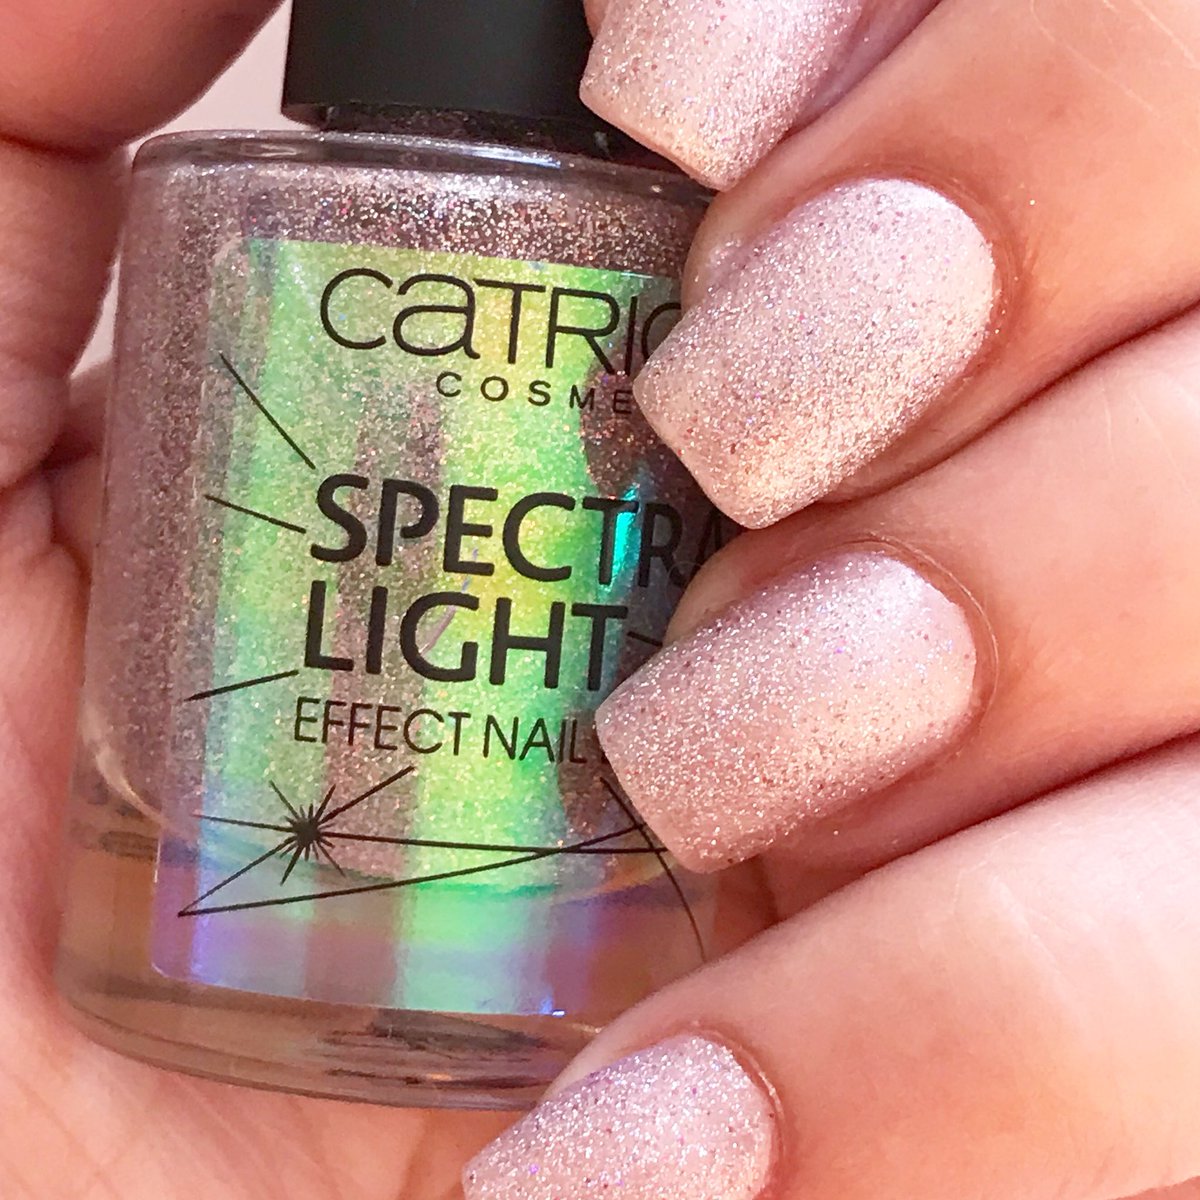 Popcorn & Pearls Twitter: "💅🏻 MANICURE MONDAY 💅🏻 Mani Monday ft. CATRICE Spectra Light Holographic Glow Effect Nail Lacquer in the colour Down The Milky Way @CatriceSA avail from @